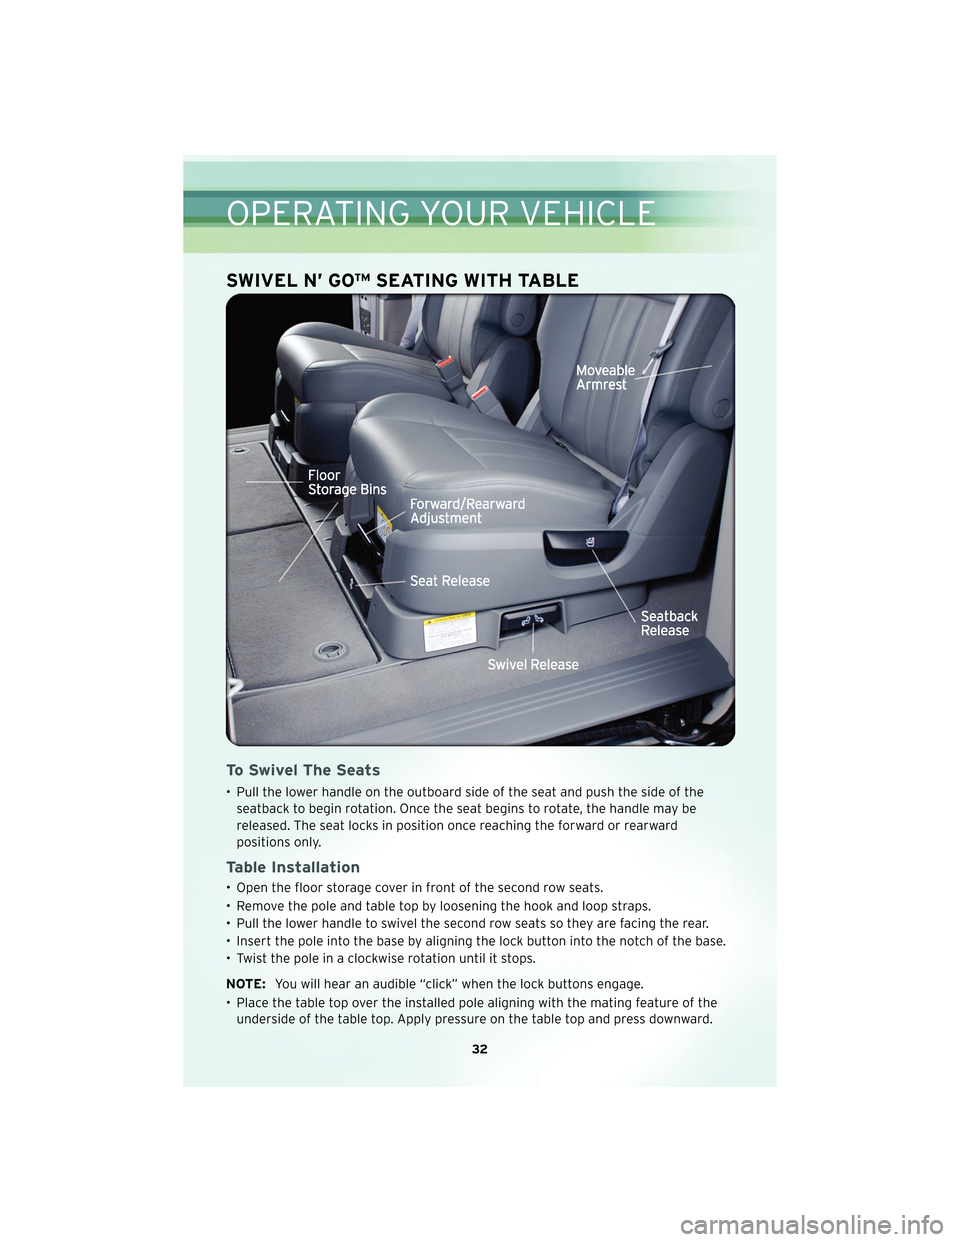 CHRYSLER TOWN AND COUNTRY 2010 5.G User Guide SWIVEL N’ GO™ SEATING WITH TABLE
To Swivel The Seats
• Pull the lower handle on the outboard side of the seat and push the side of theseatback to begin rotation. Once the seat begins to rotate, 